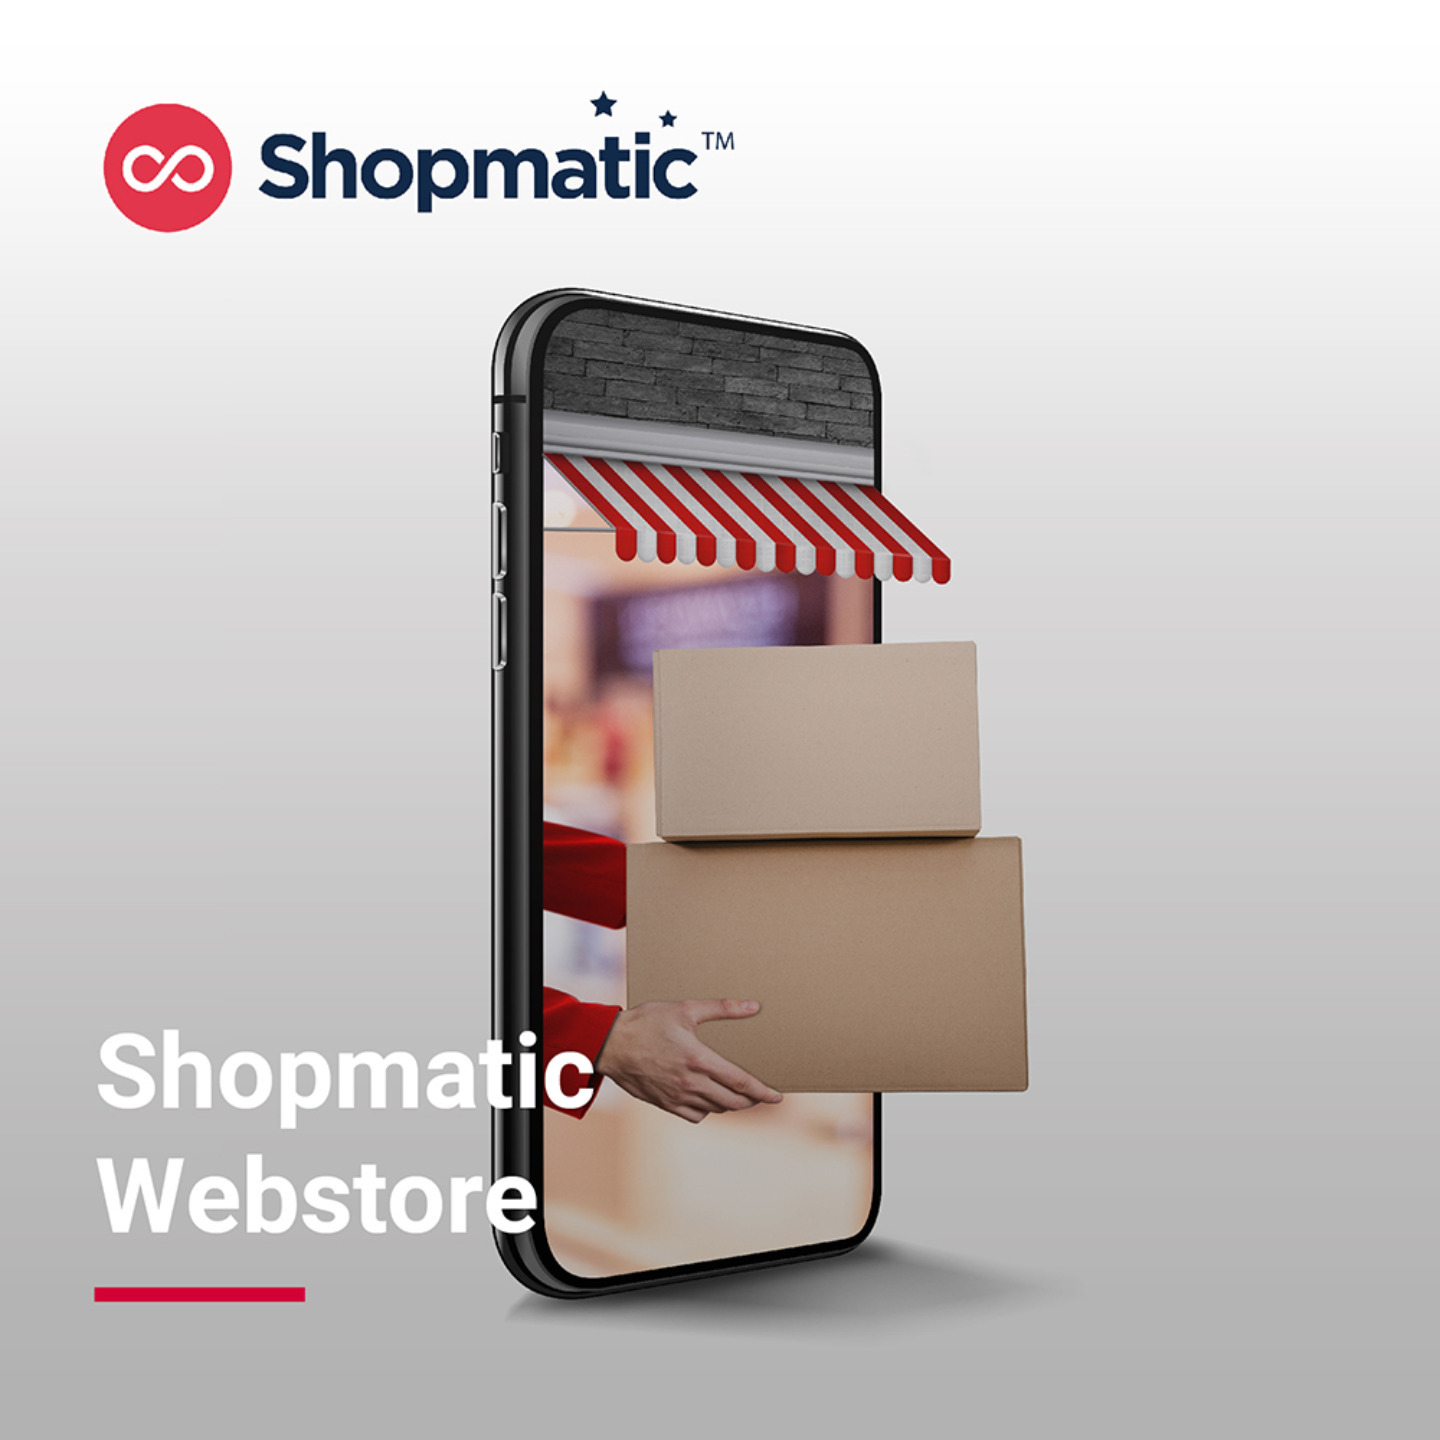 Shopmatic Webstore Pre-approved Solution by IMDA